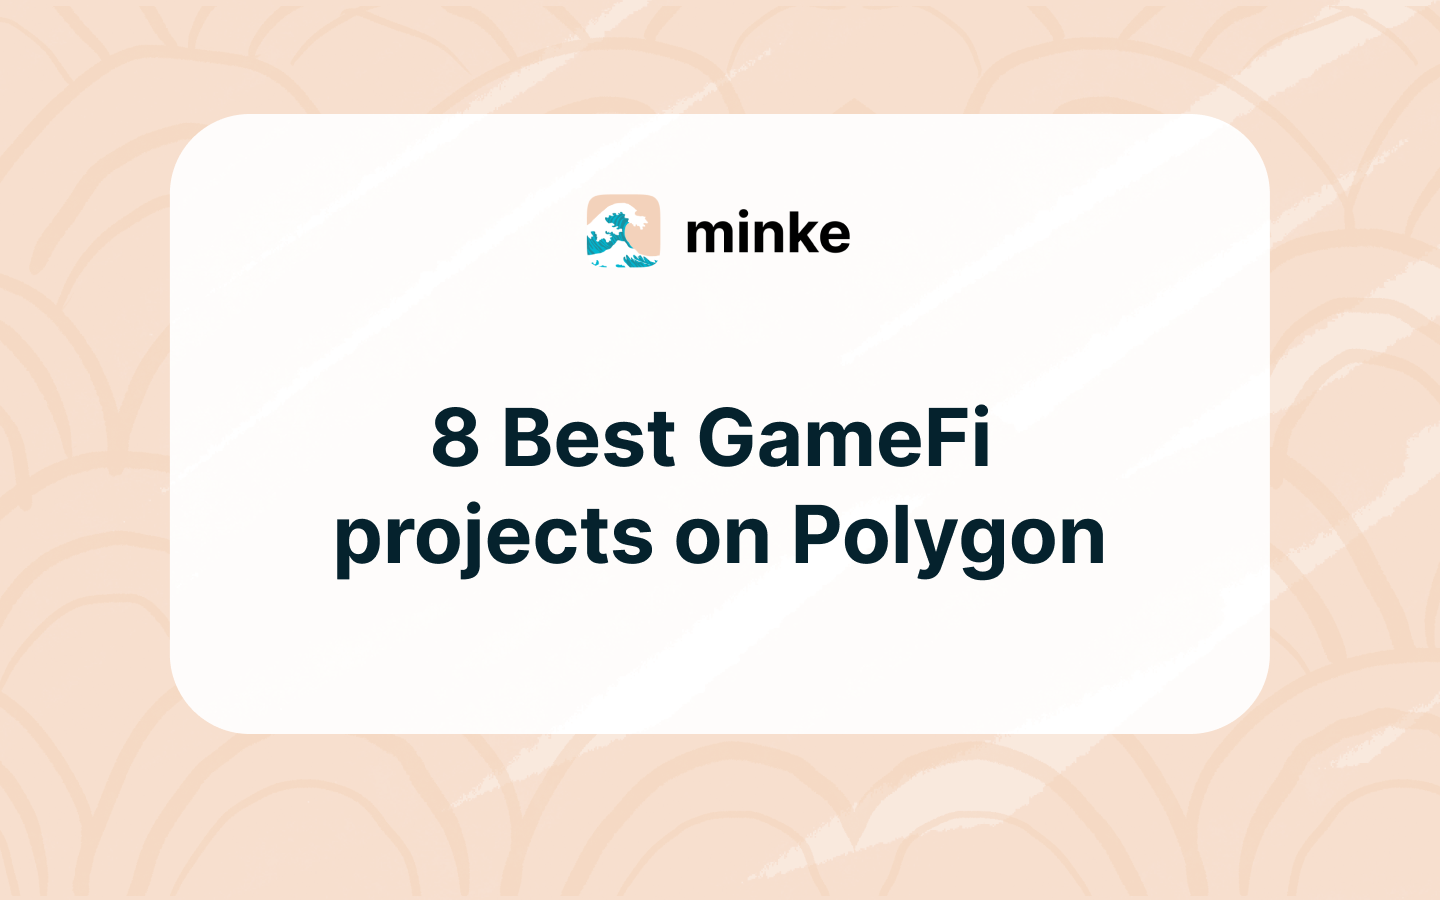 8 Best GameFi projects on Polygon